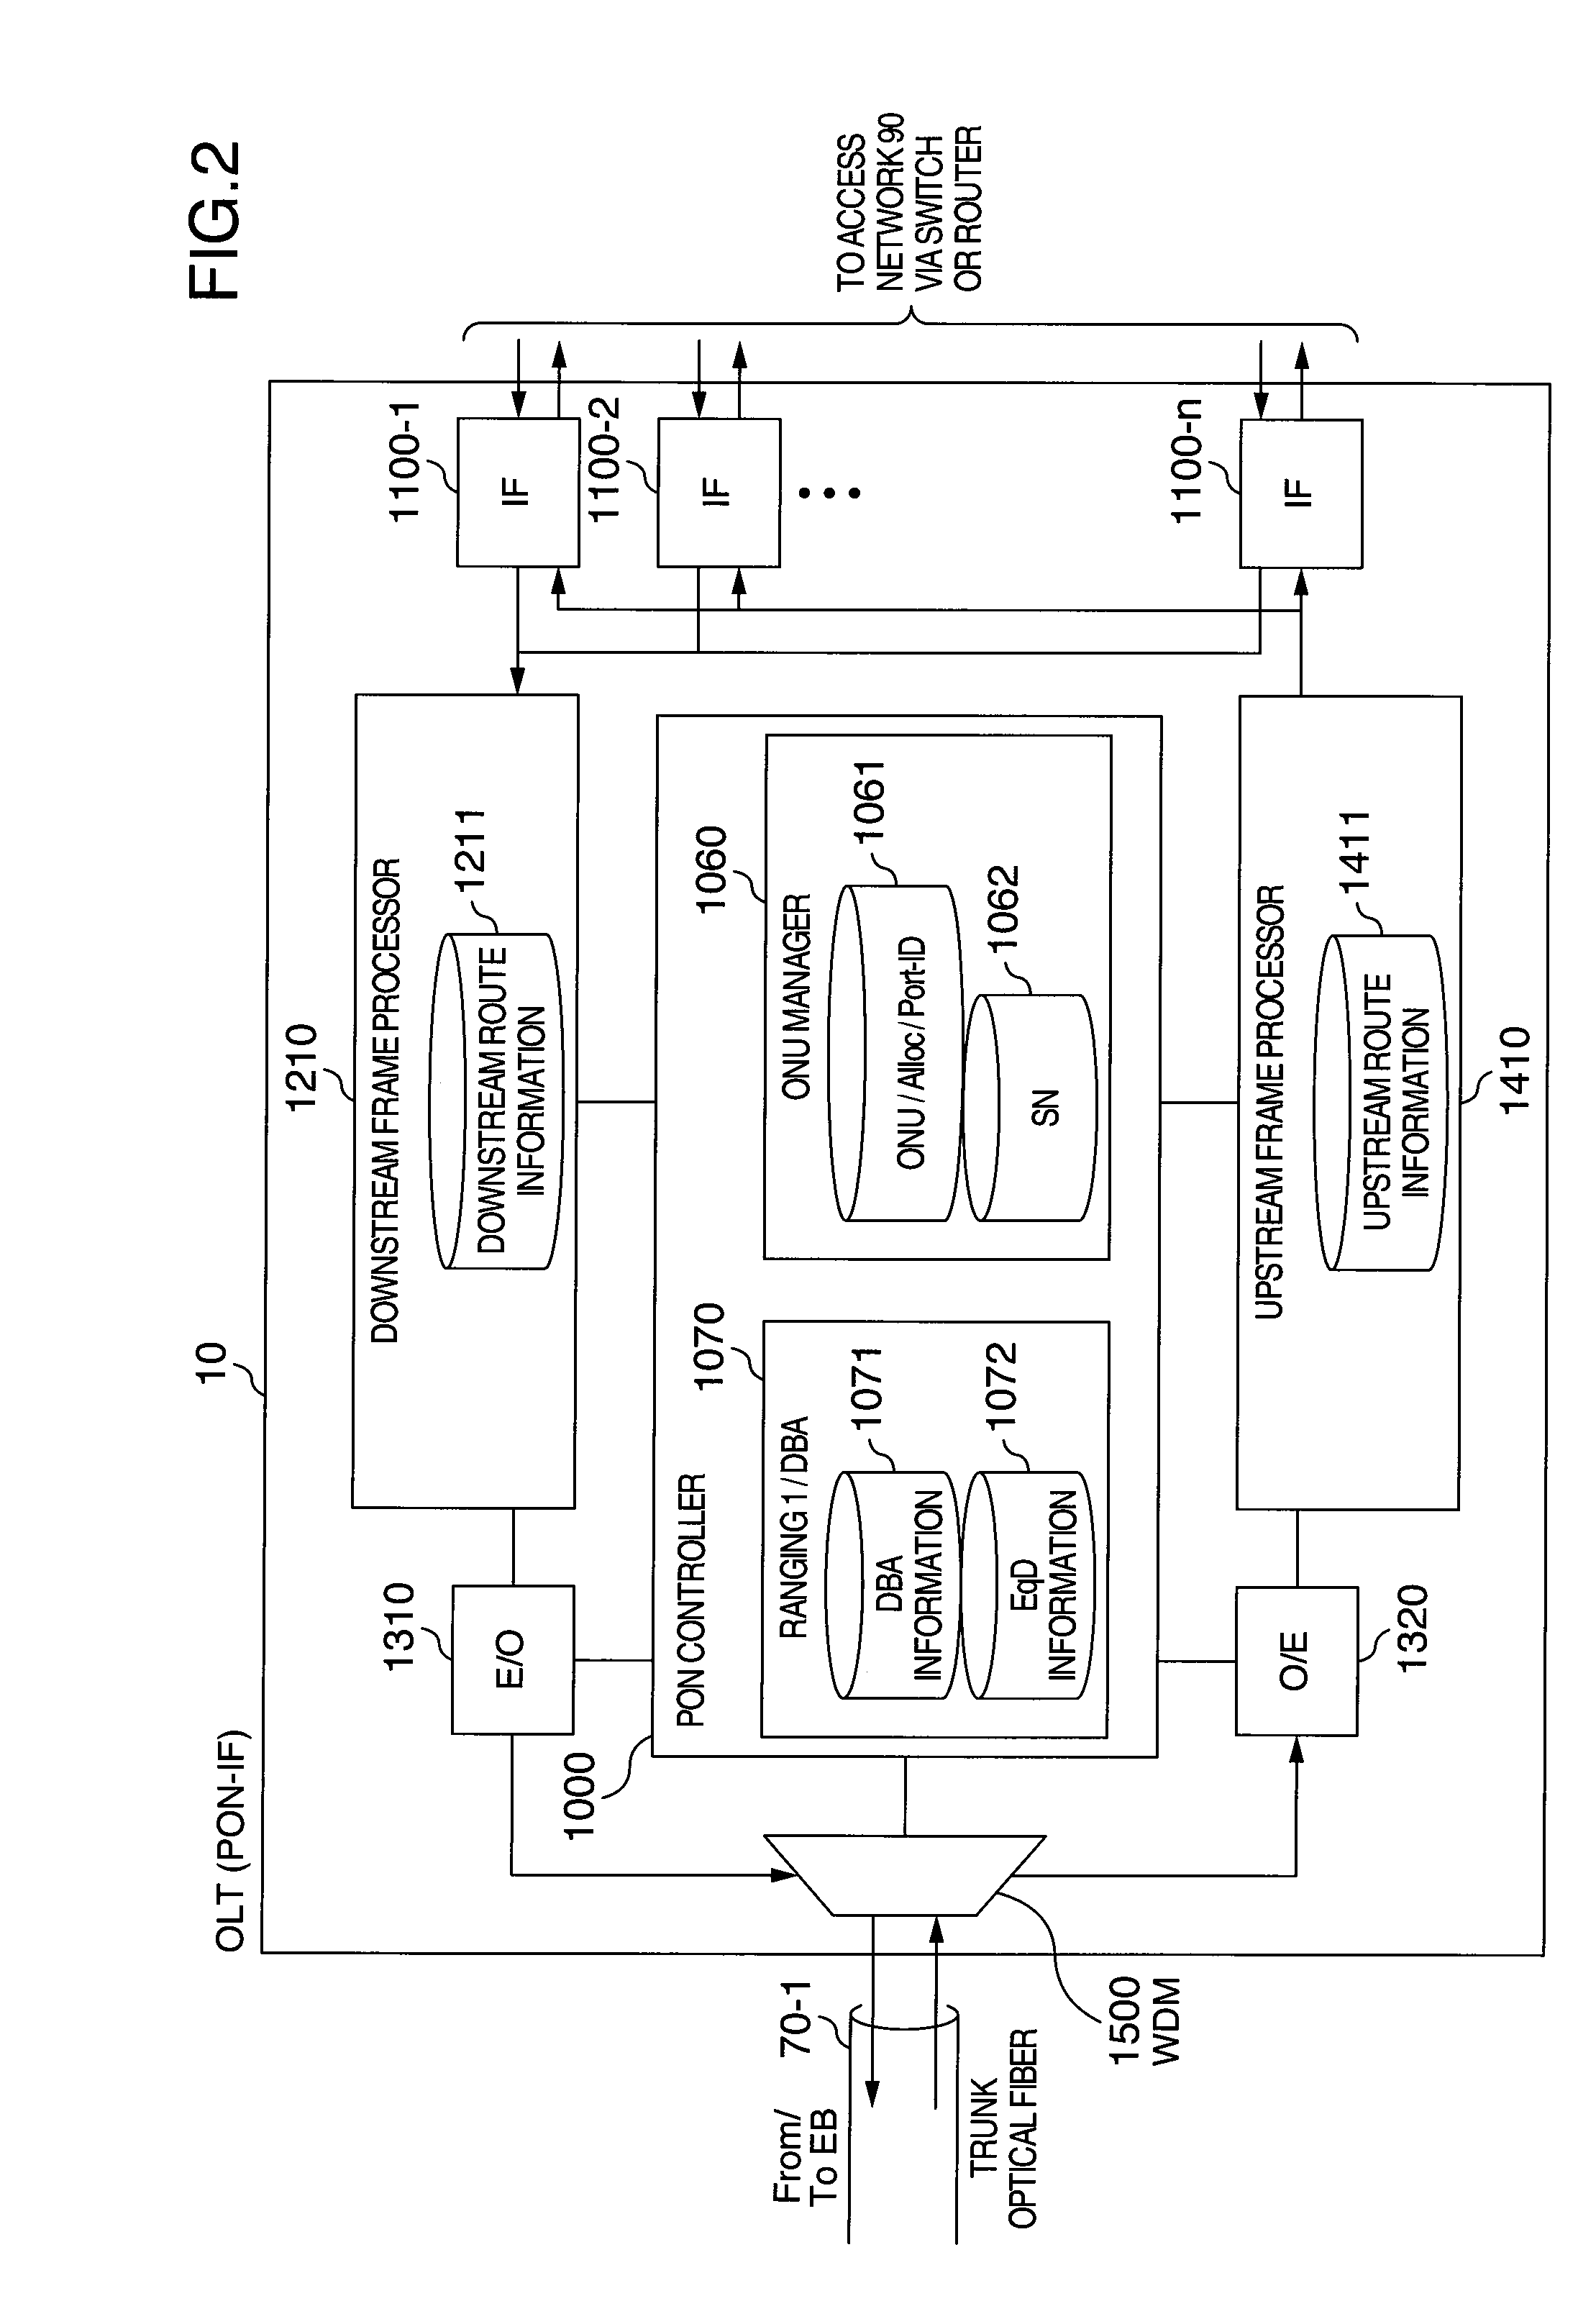 Optical communication system and method for operating the same